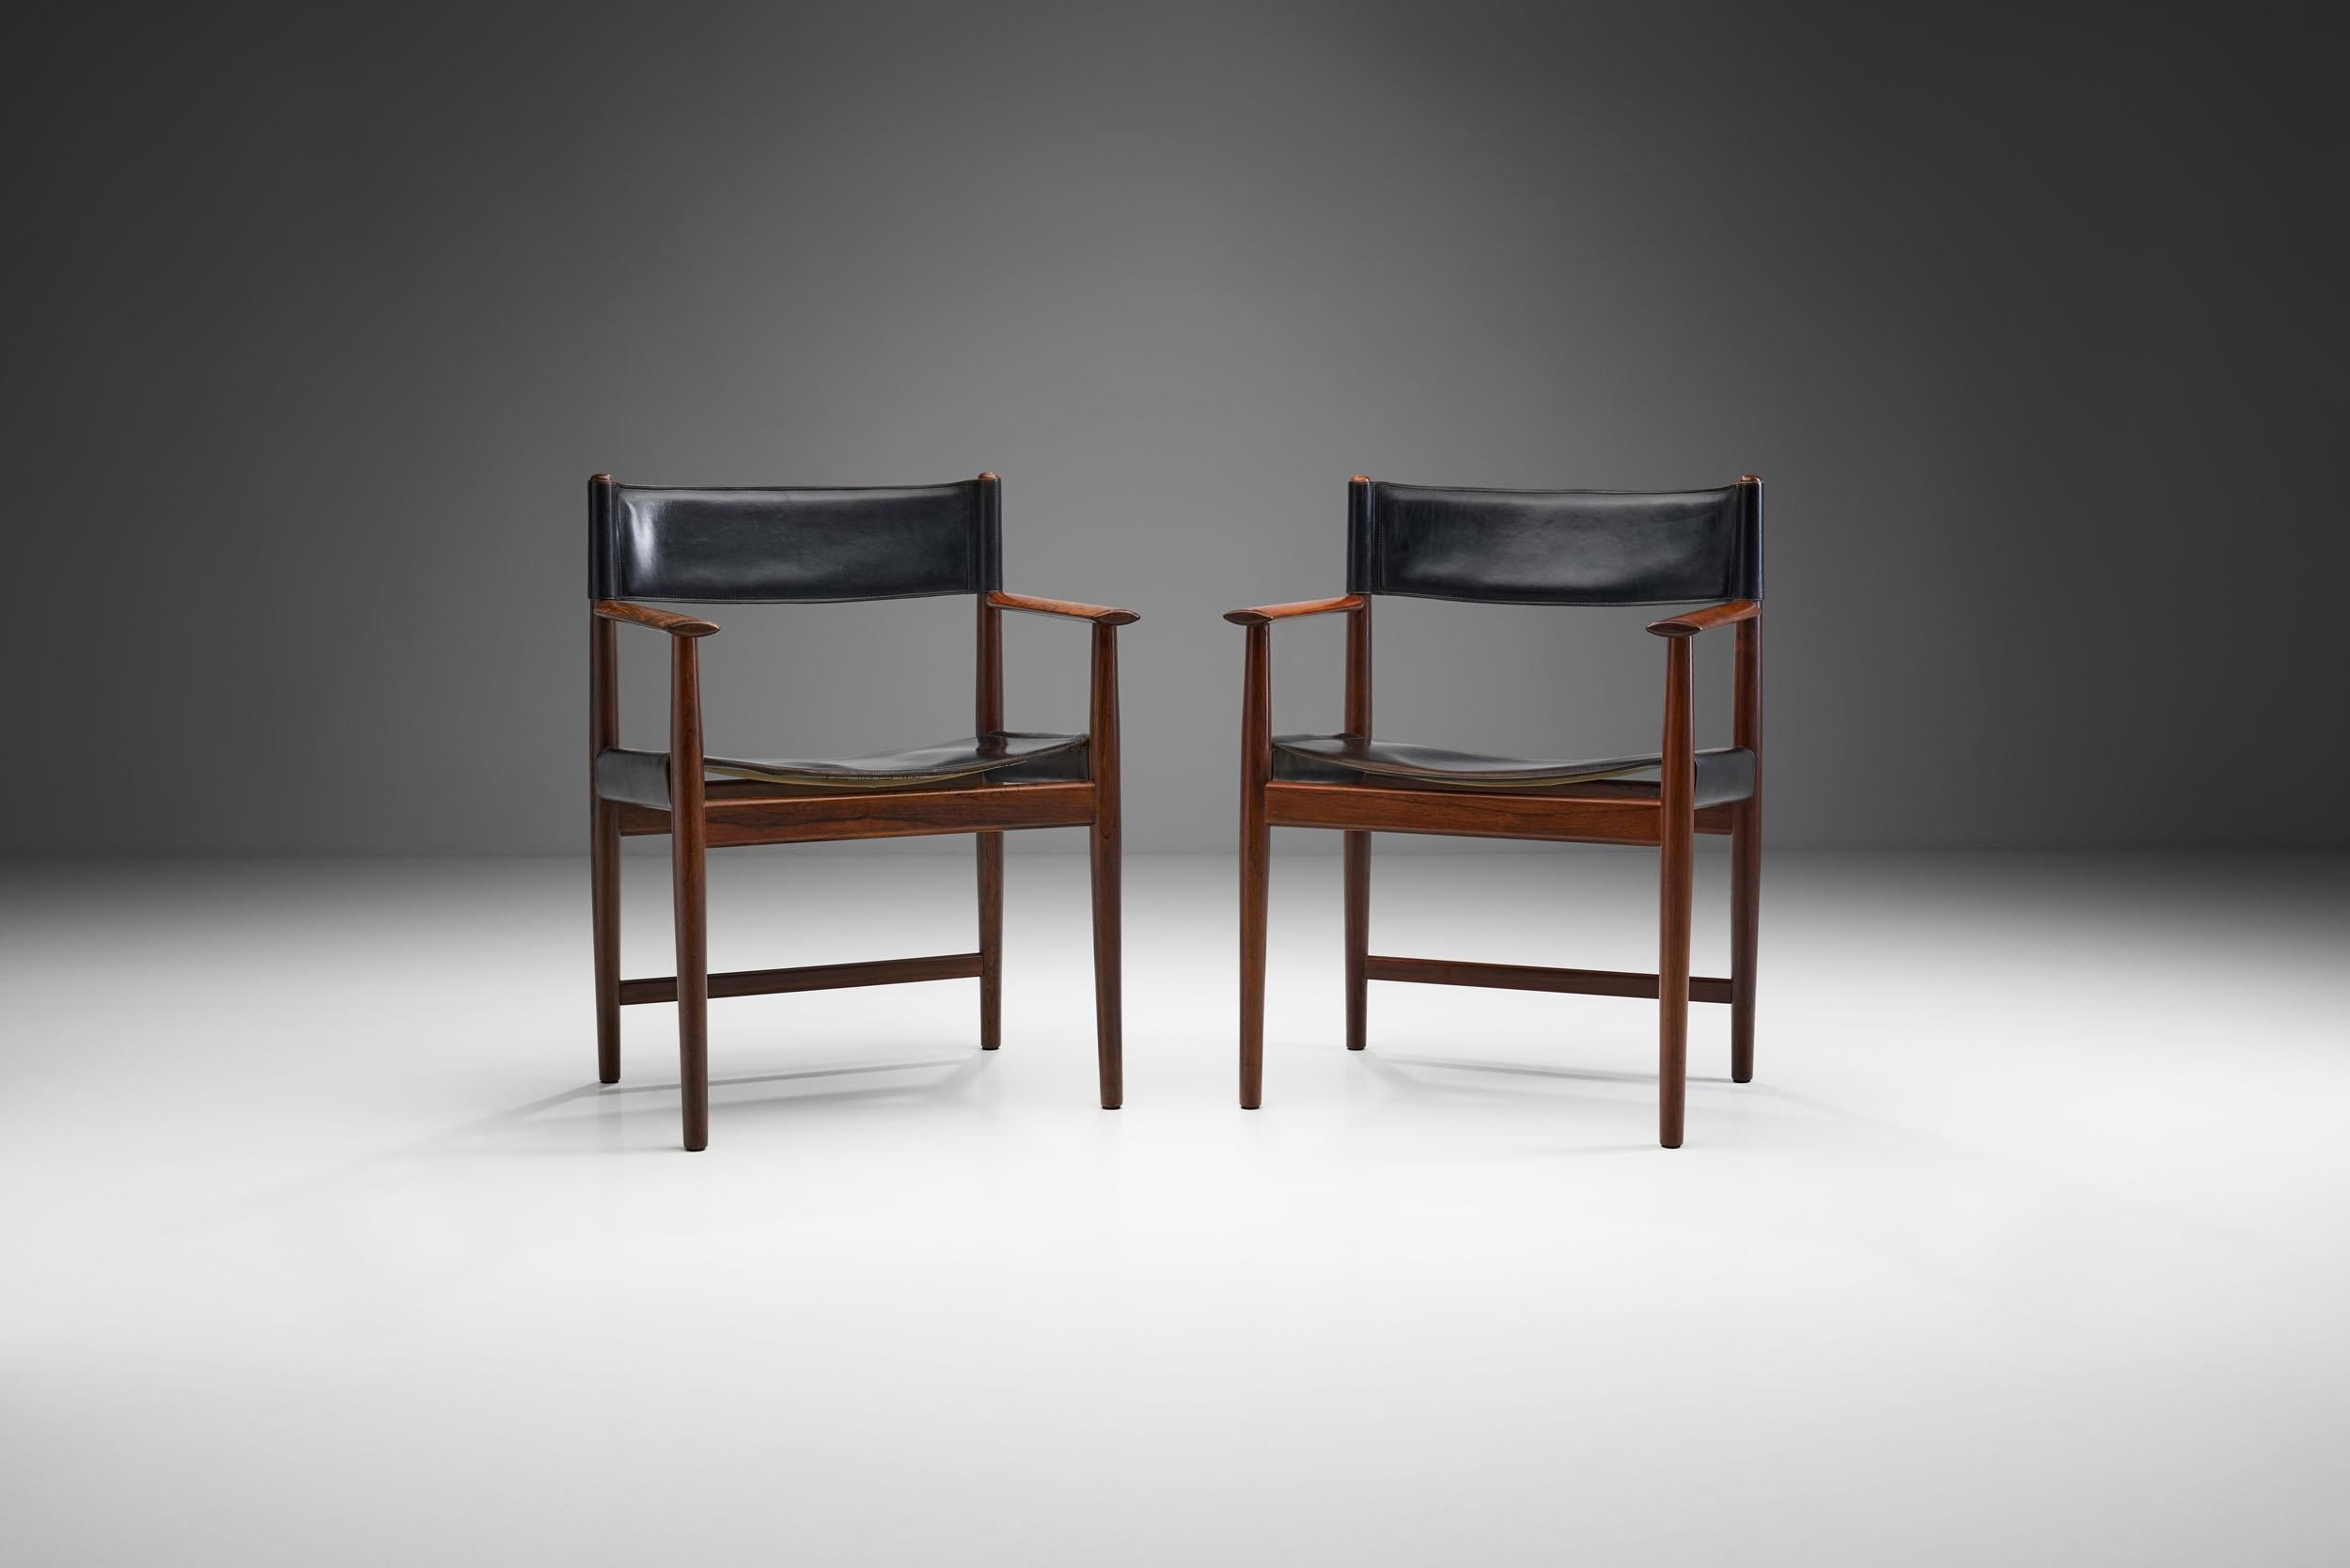 This pair of dining chairs by Danish designer Kurt Østervig is a beautiful example of simple, refined midcentury Danish design.

The black leather chairs are made of beautifully aged wood, with a dark color. The combination of the deep color of